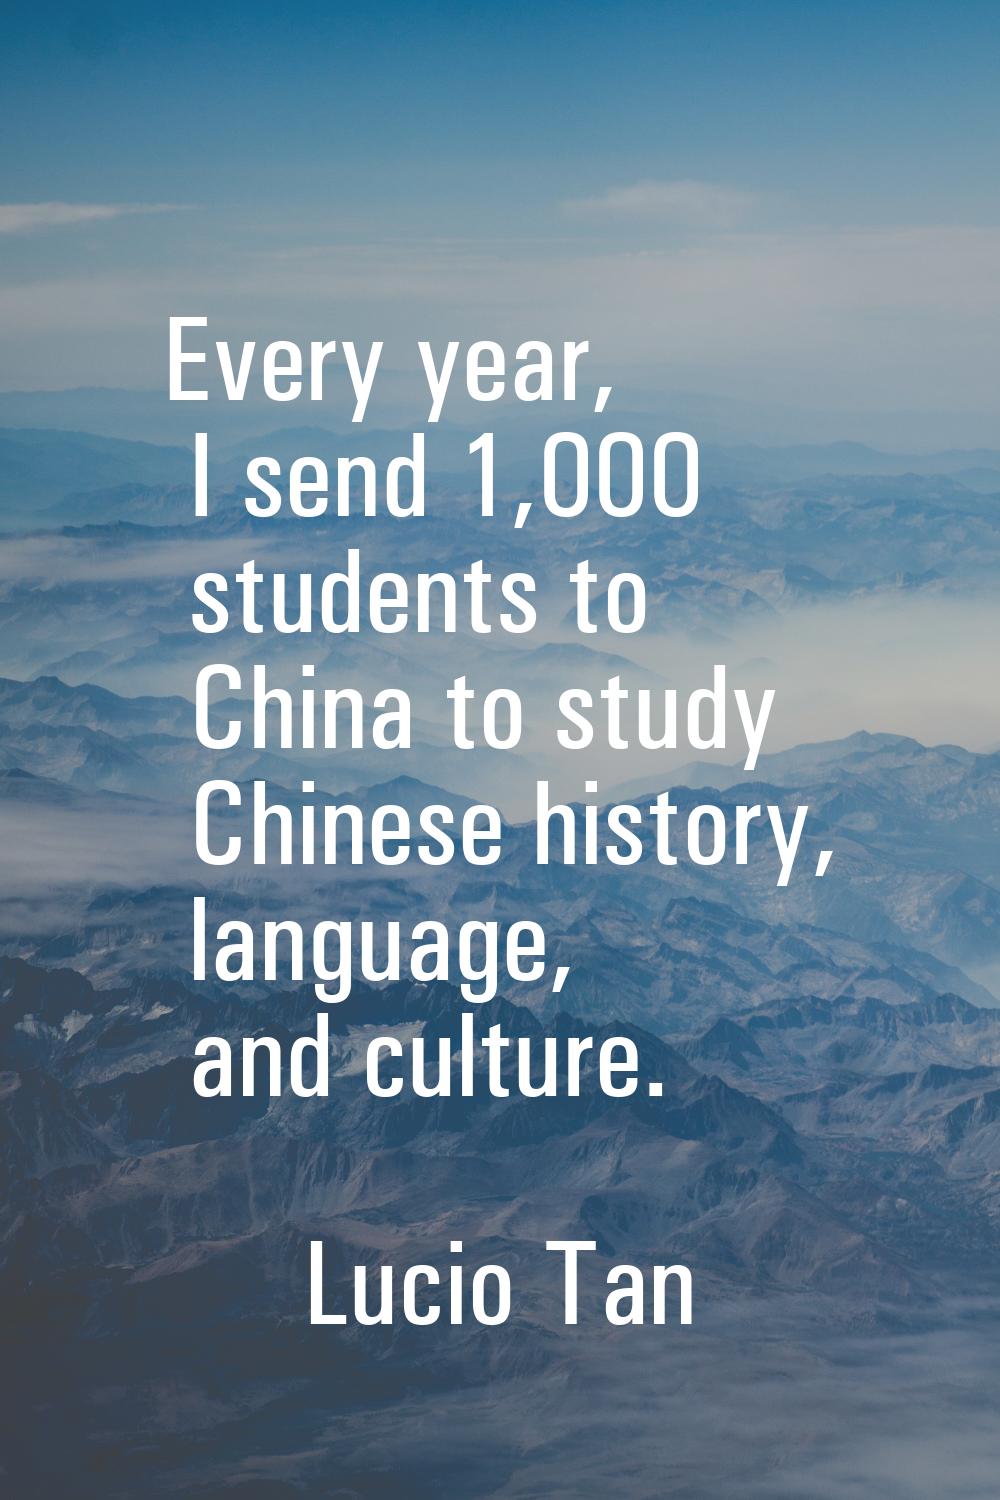 Every year, I send 1,000 students to China to study Chinese history, language, and culture.